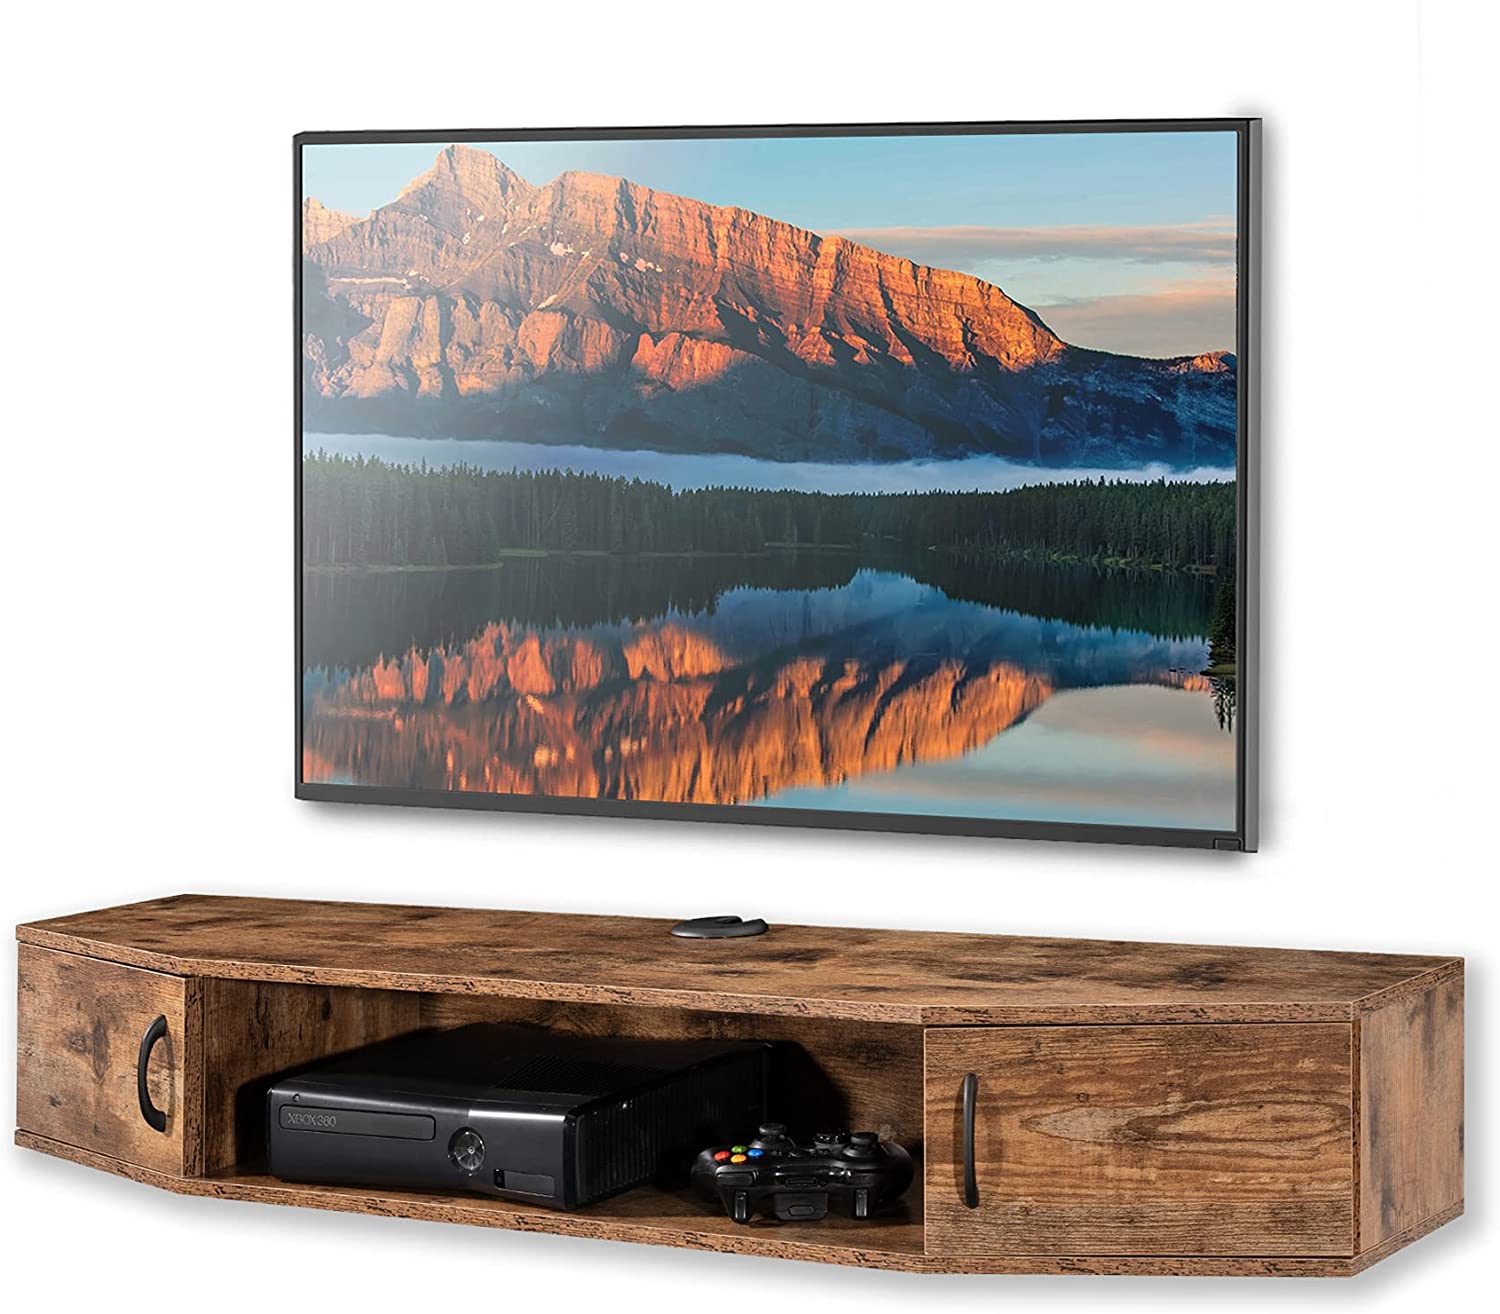 FITUEYES Wall Mounted Media Console